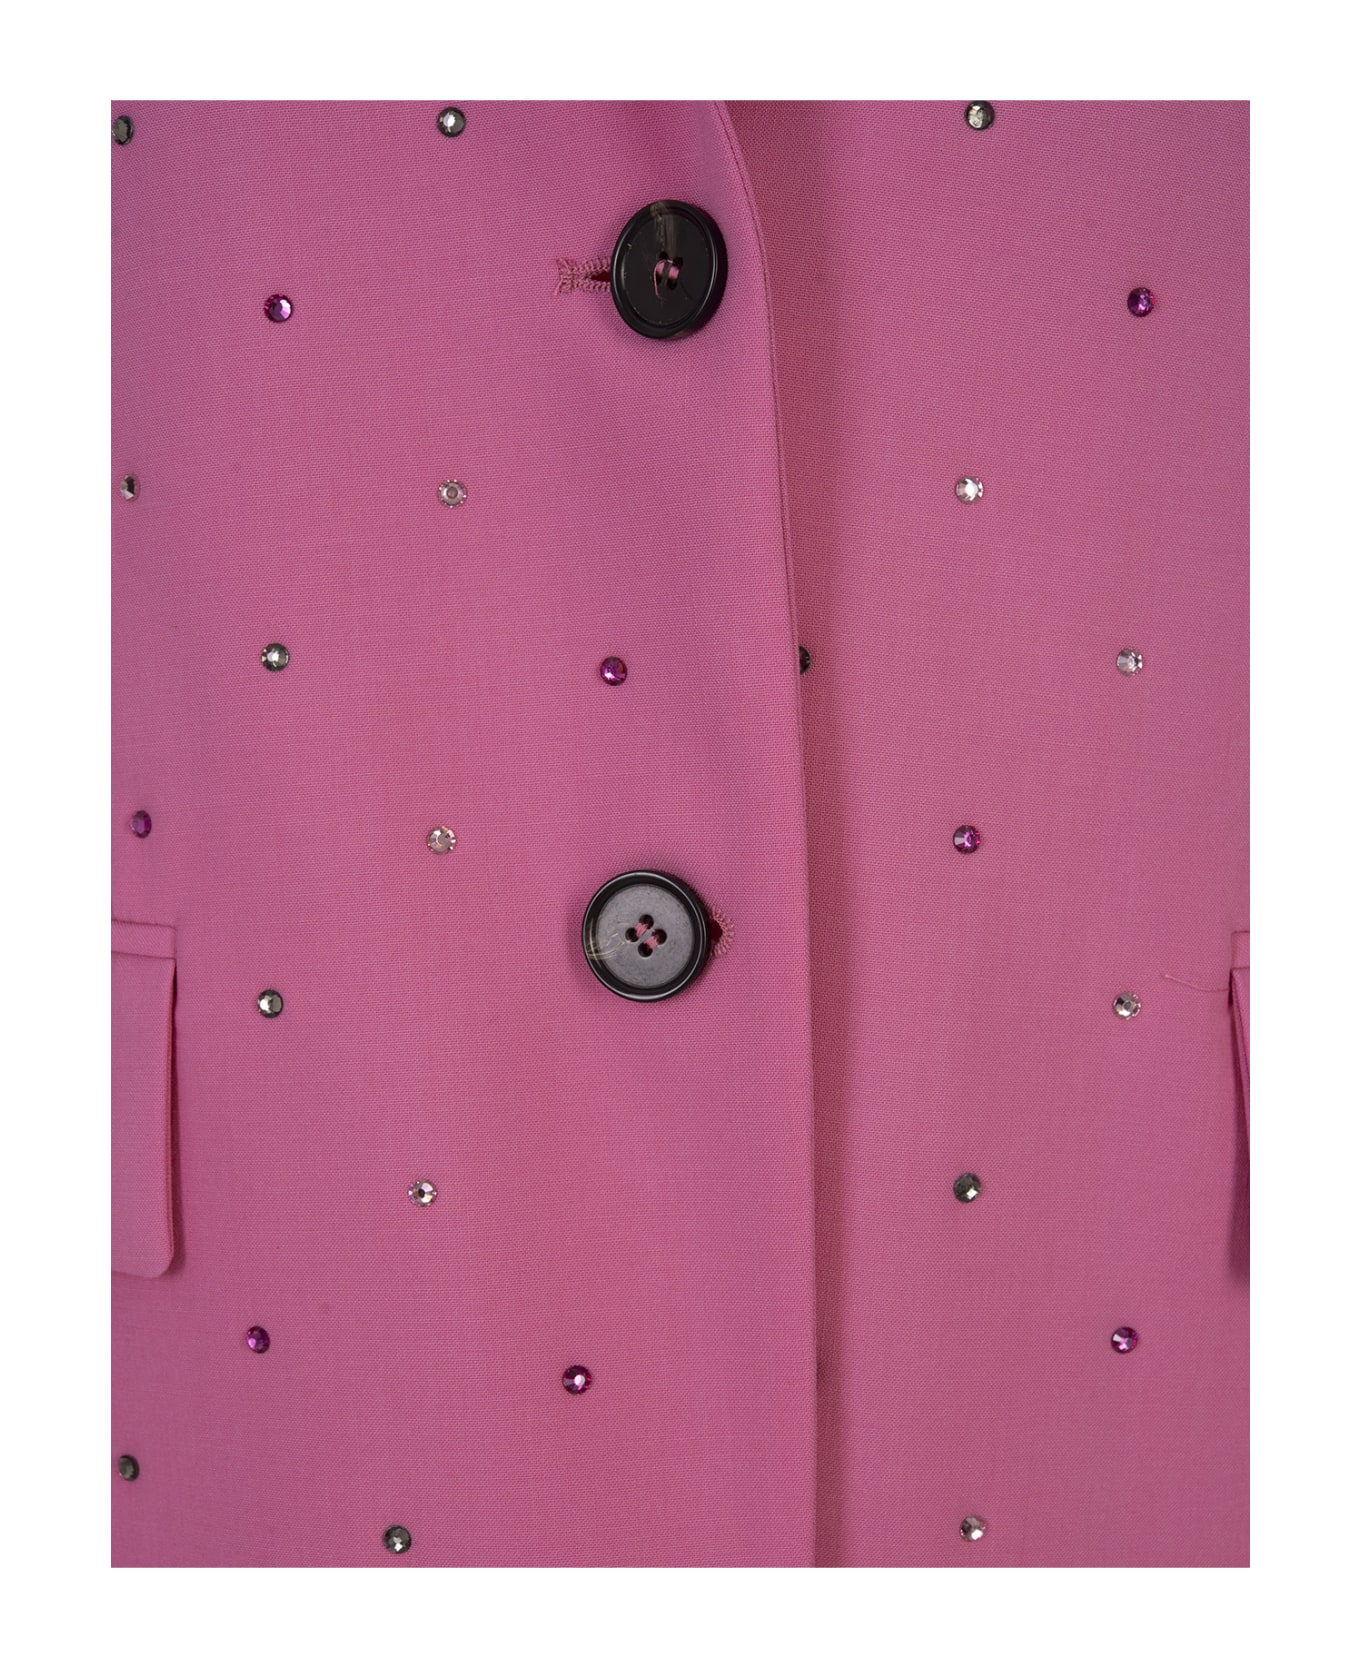 MSGM 'wool Suiting' Jacket In Pink Virgin Wool With Jewelled Applications - Pink ブレザー